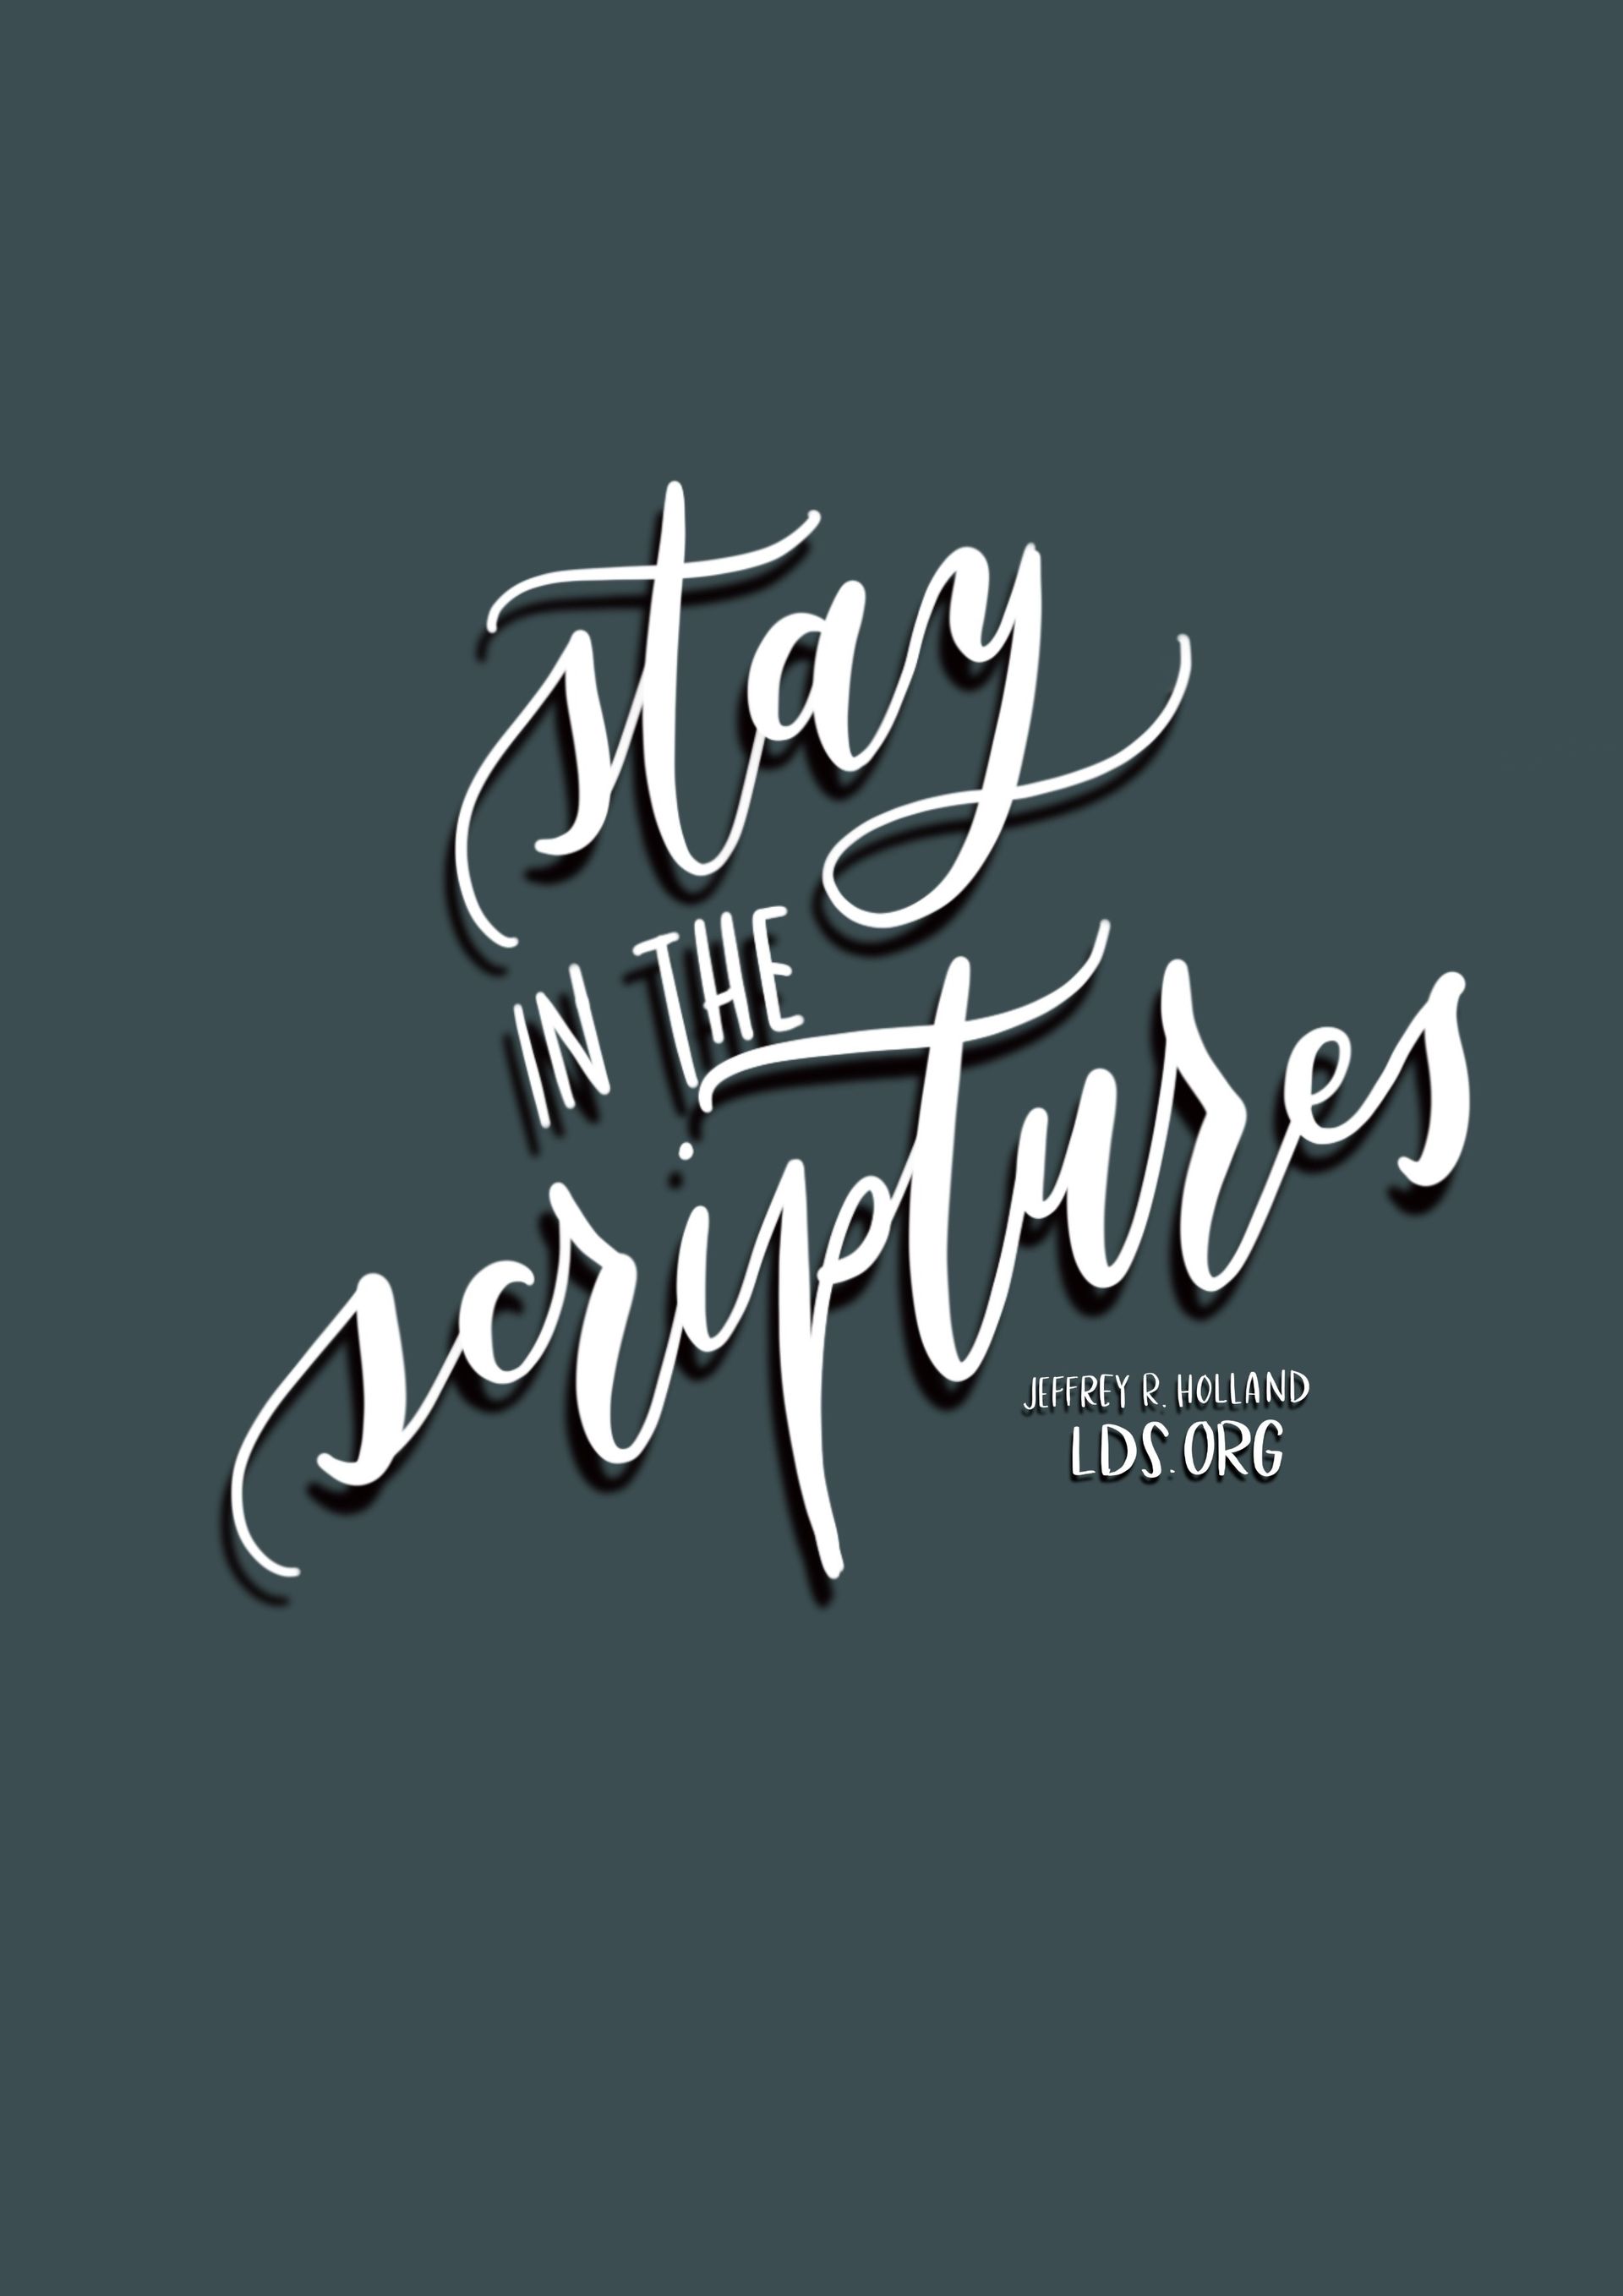 “Stay in the scriptures.”—Elder Jeffrey R. Holland, “Face to Face with President Eyring and Elder Holland” Created by Jenae Nelson.